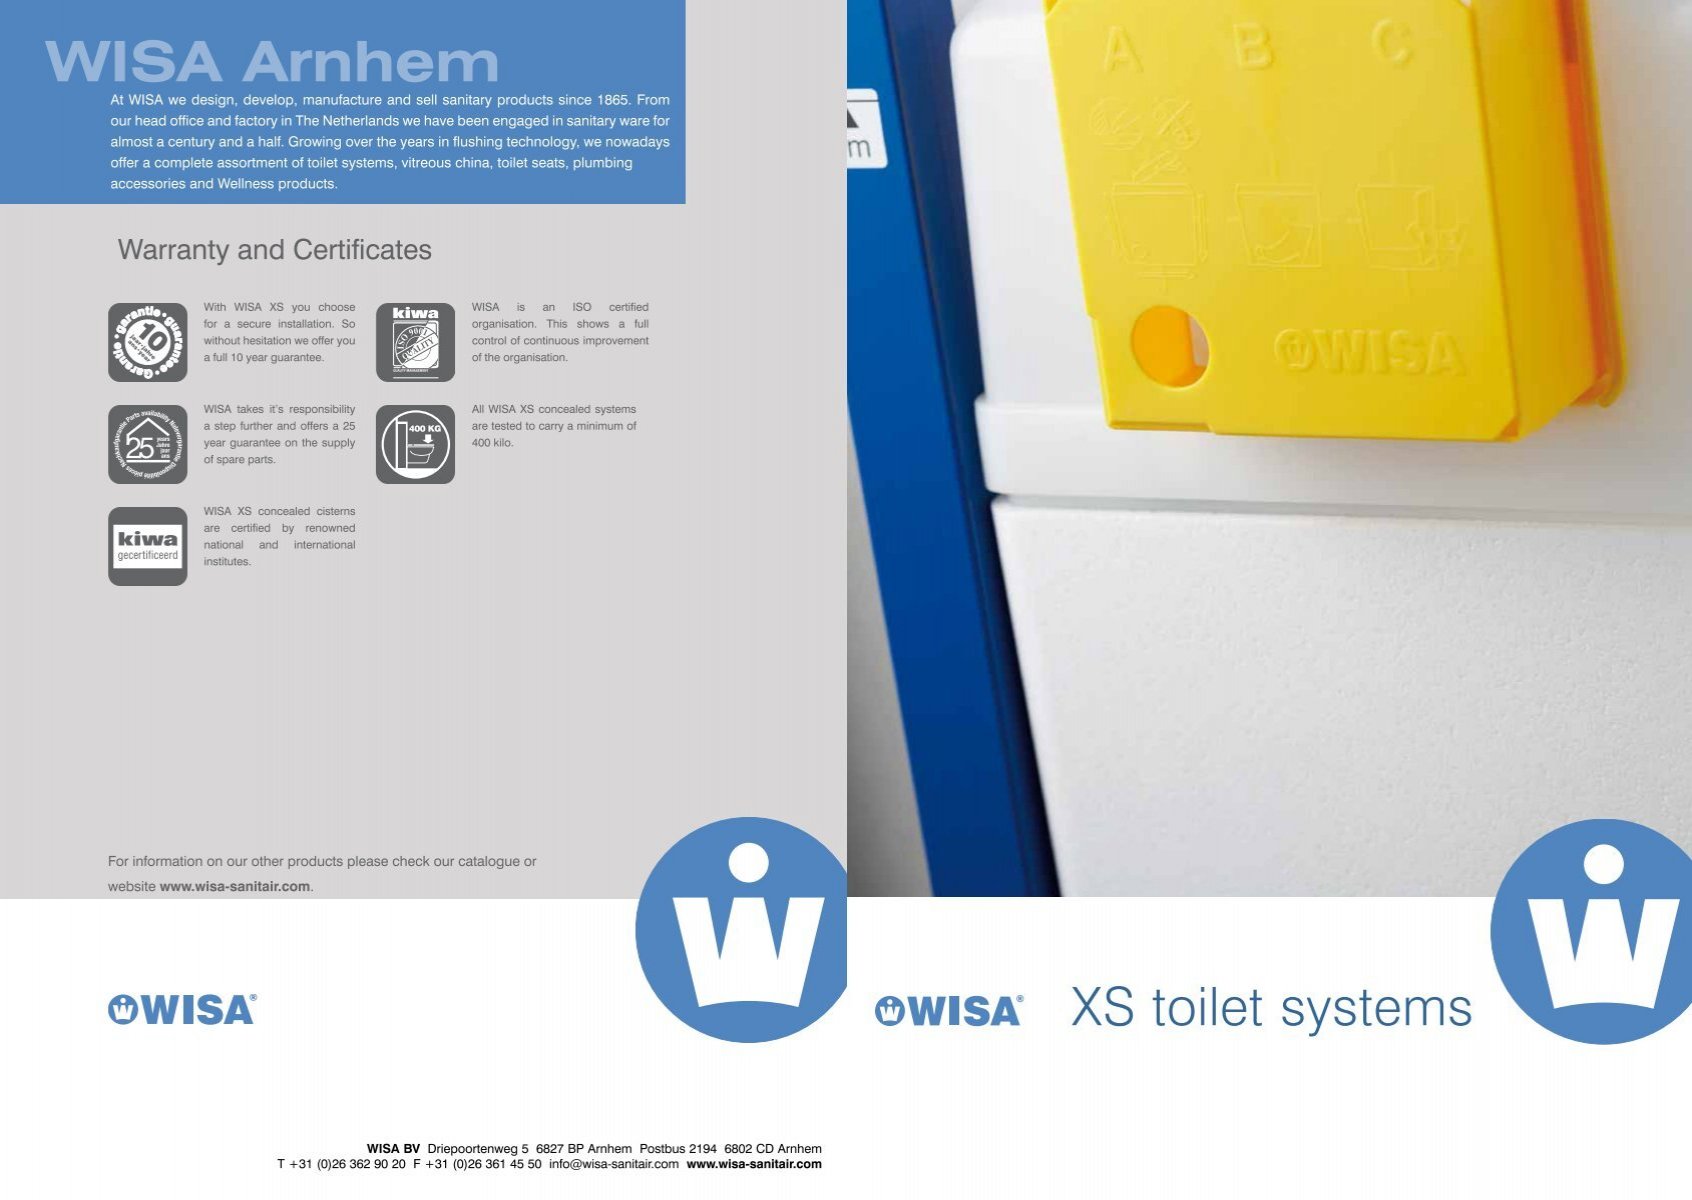 Achtervoegsel pasta Messing WISA XS toilet systems (pdf)